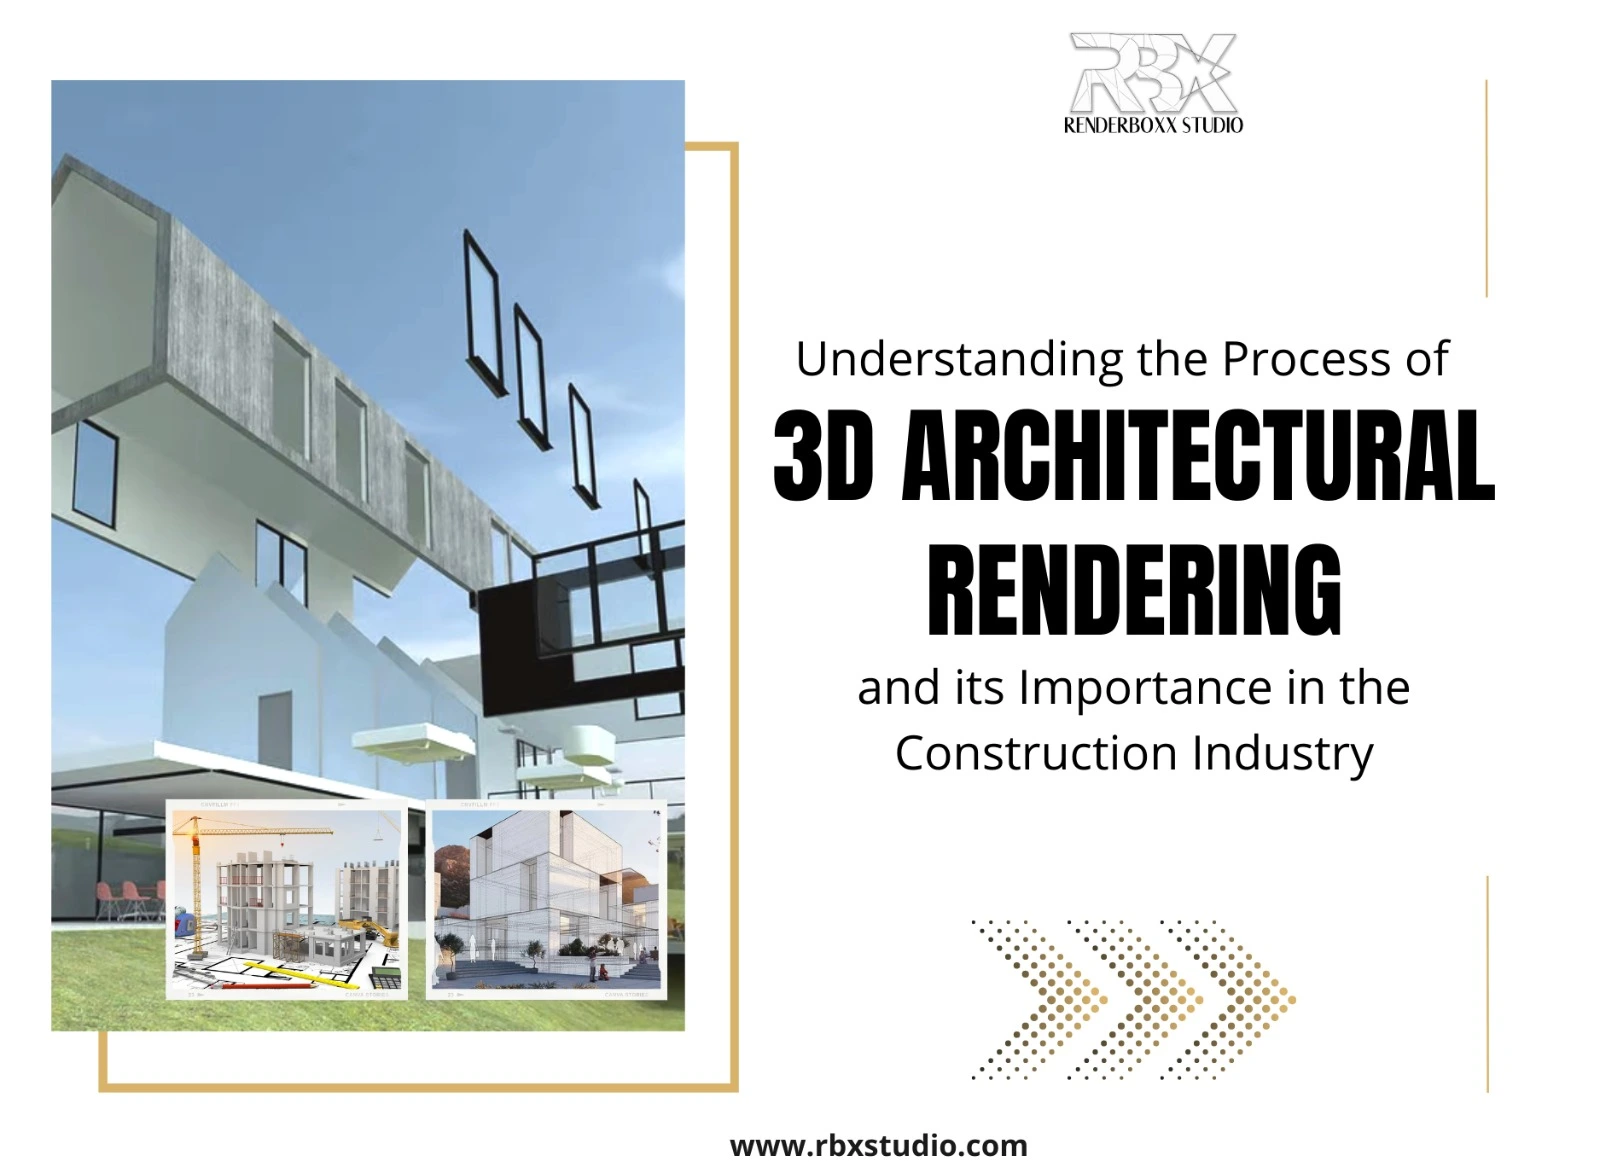 3D Architectural Rendering and its Importance in the Construction Industry